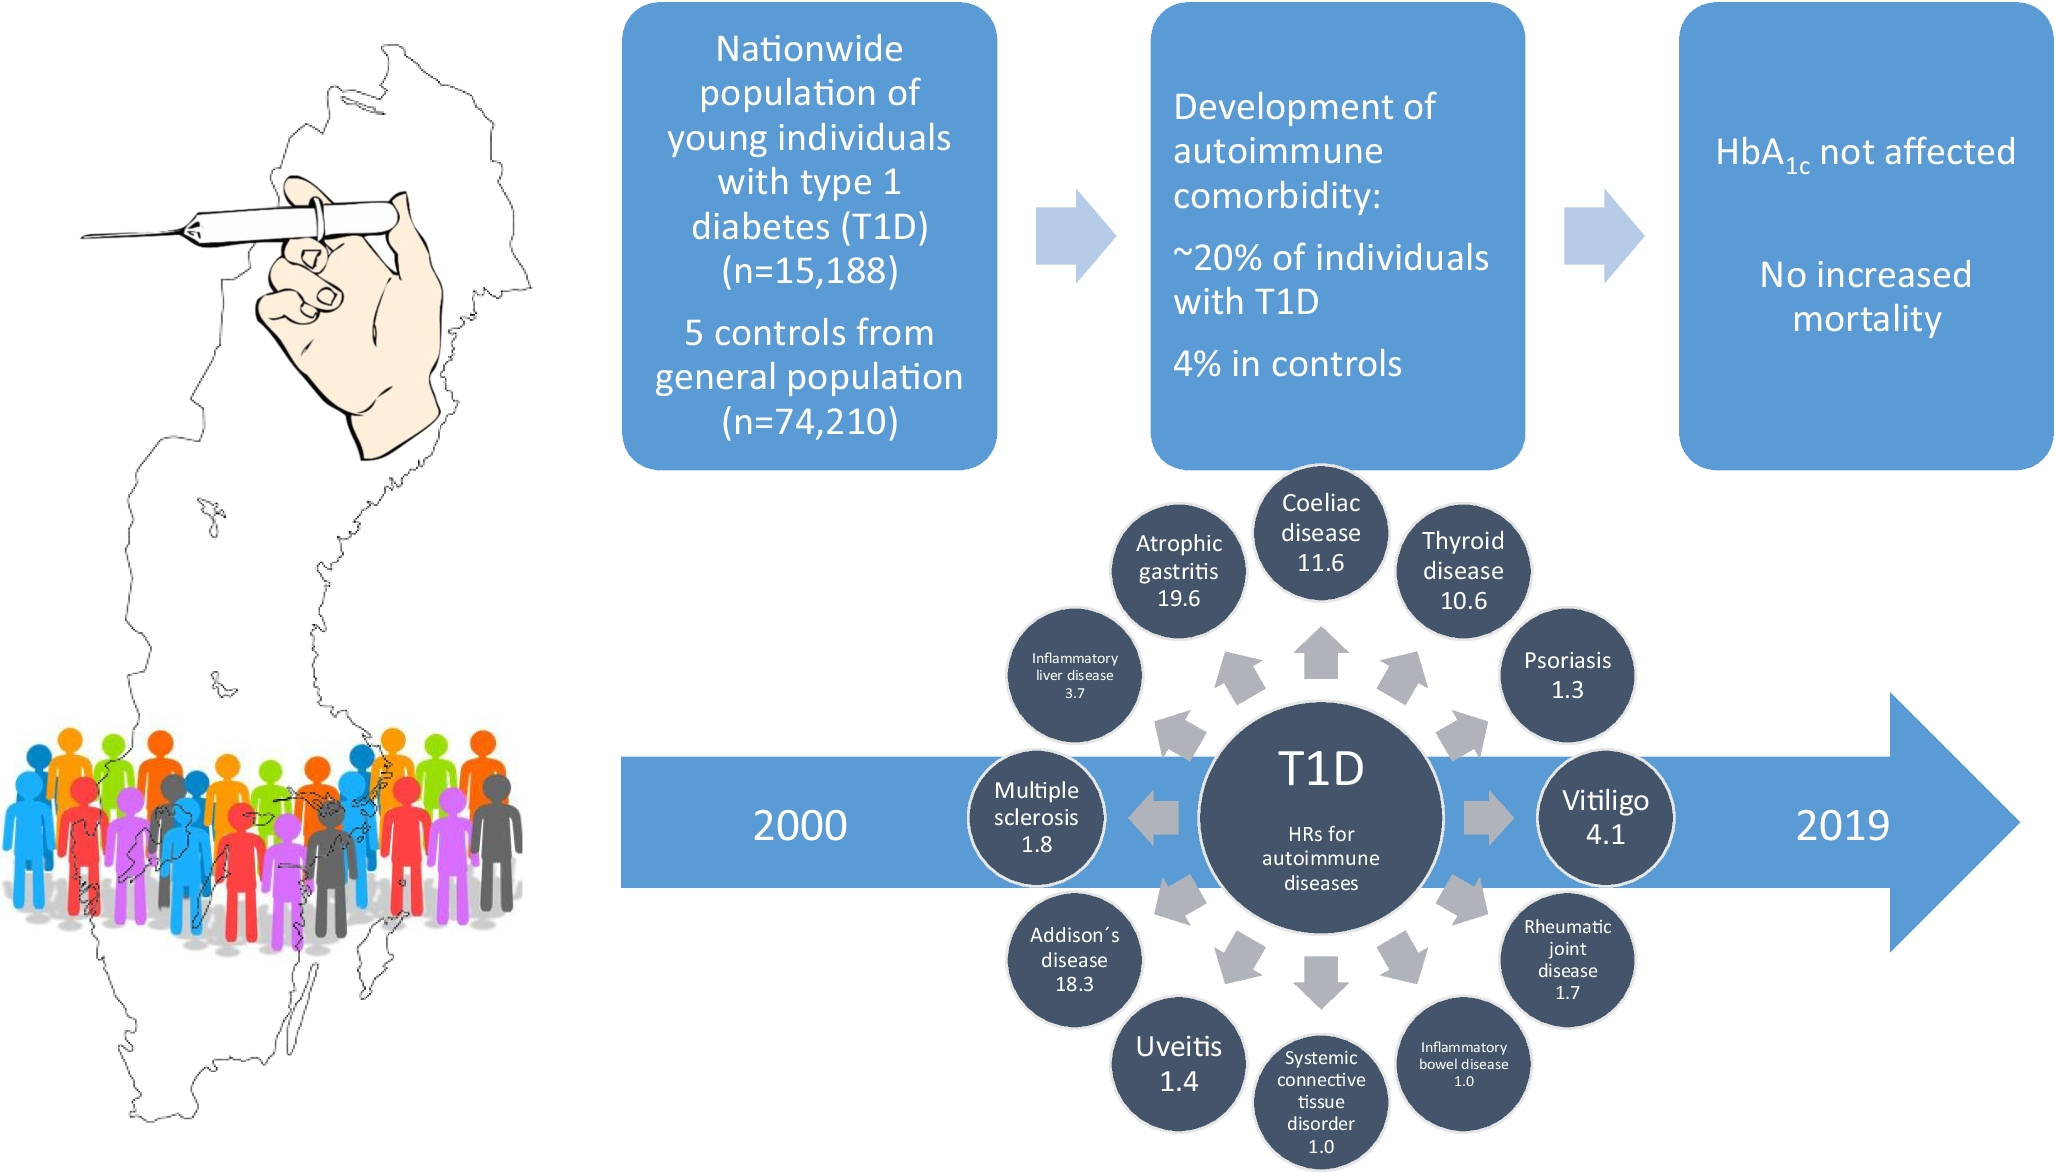 Autoimmune comorbidity in type 1 diabetes and its association with metabolic control and mortality risk in young people: a population-based study